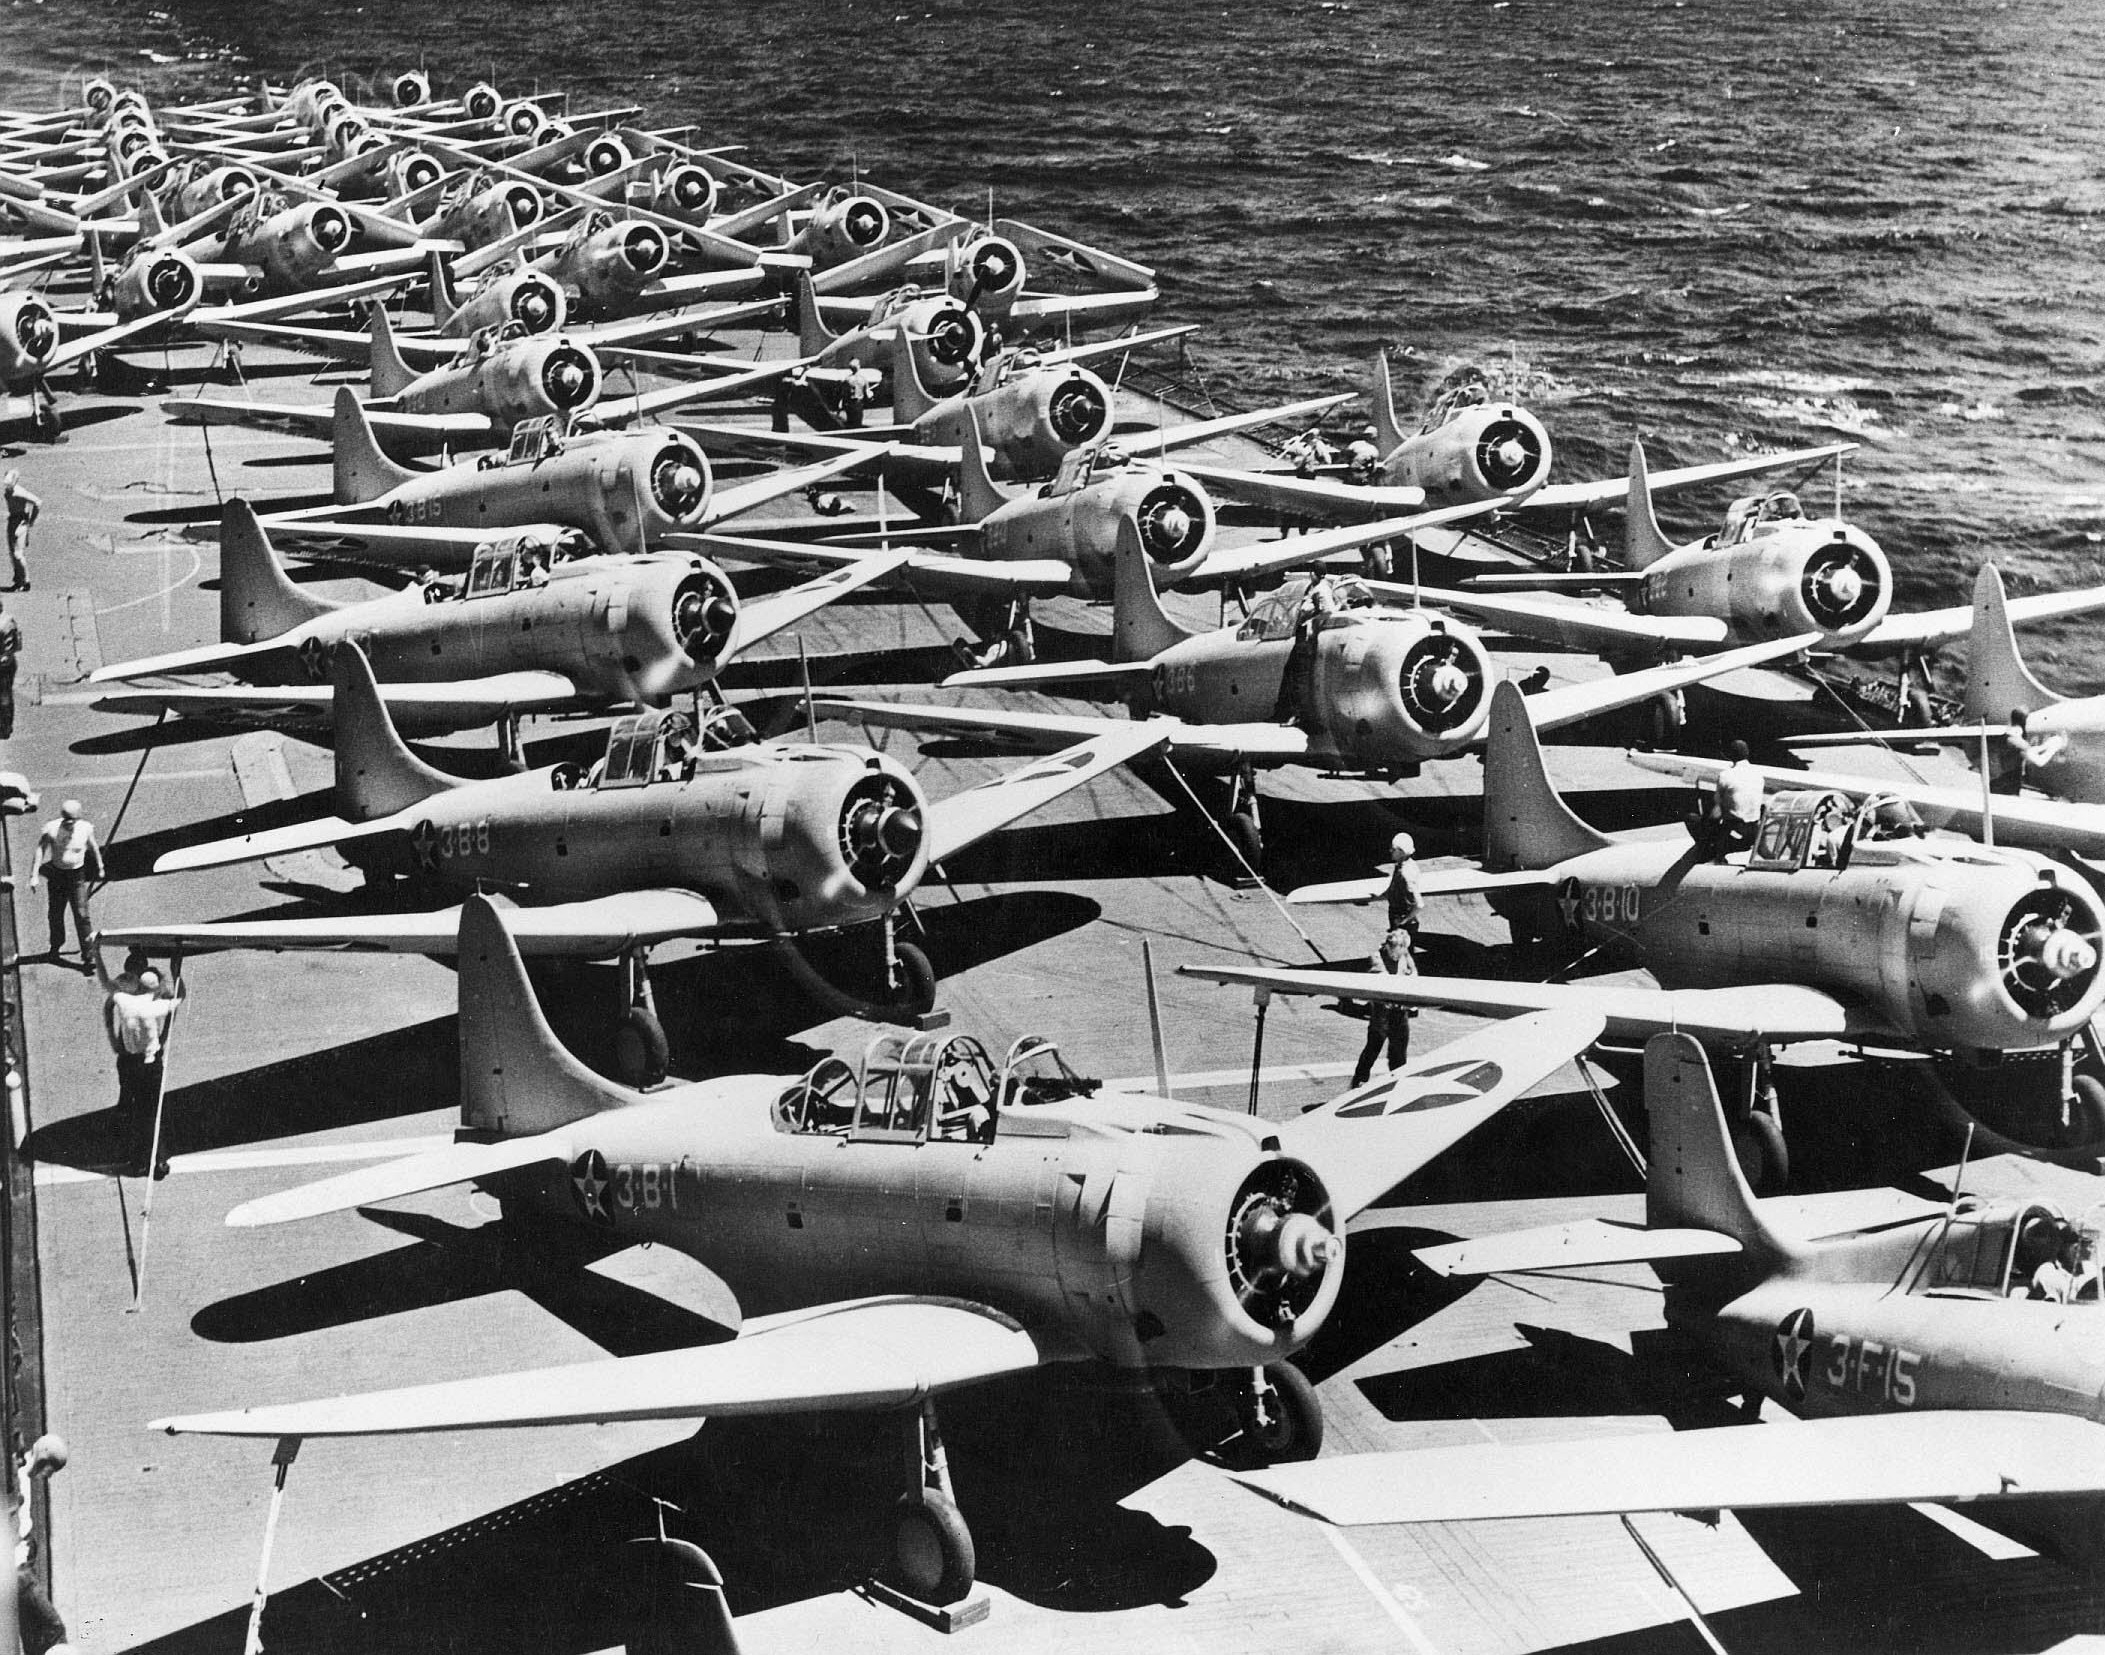 F4F-3 Wildcat (foreground), SBD-3 Dauntless (center forward and background), and TBD-1 Devastator (center rear) aircraft on the flight deck of USS Saratoga, fall 1941